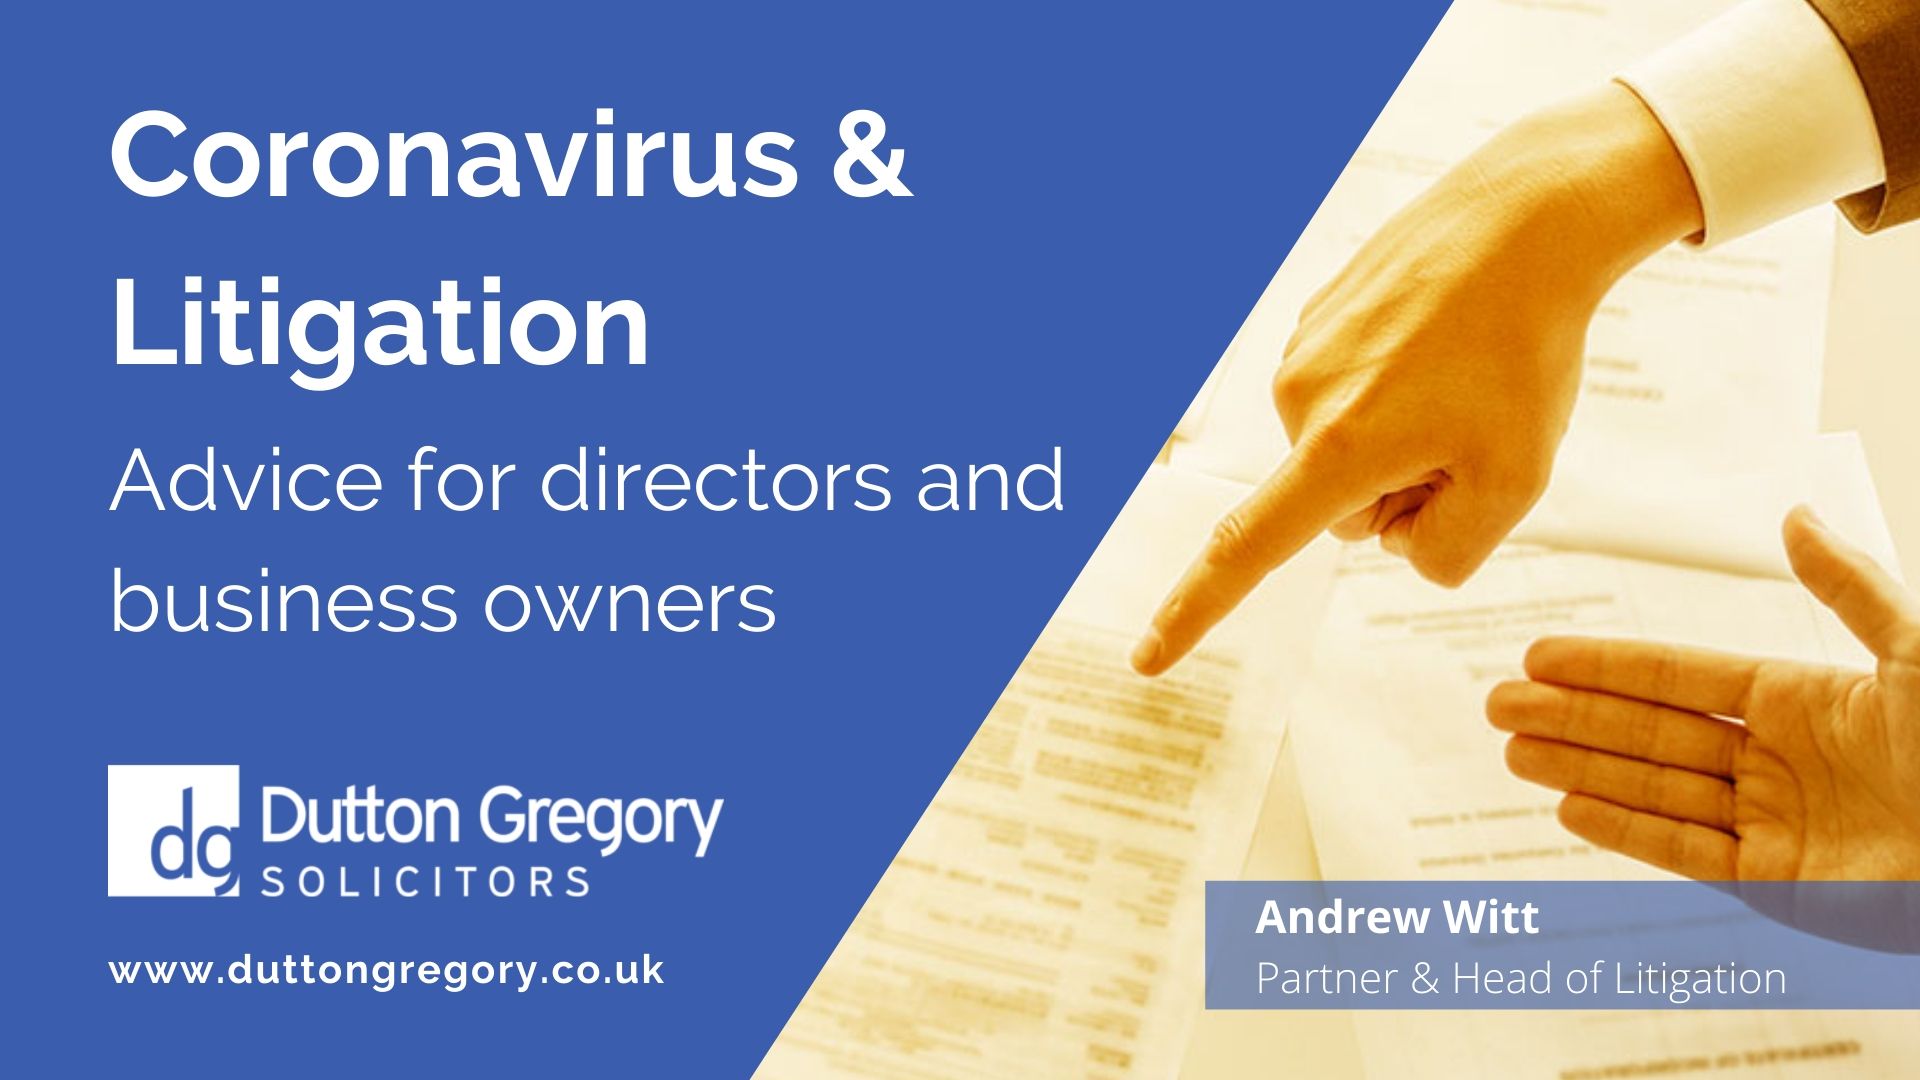 Commercial Litigation Update: advice for directors and business owners during coronavirus